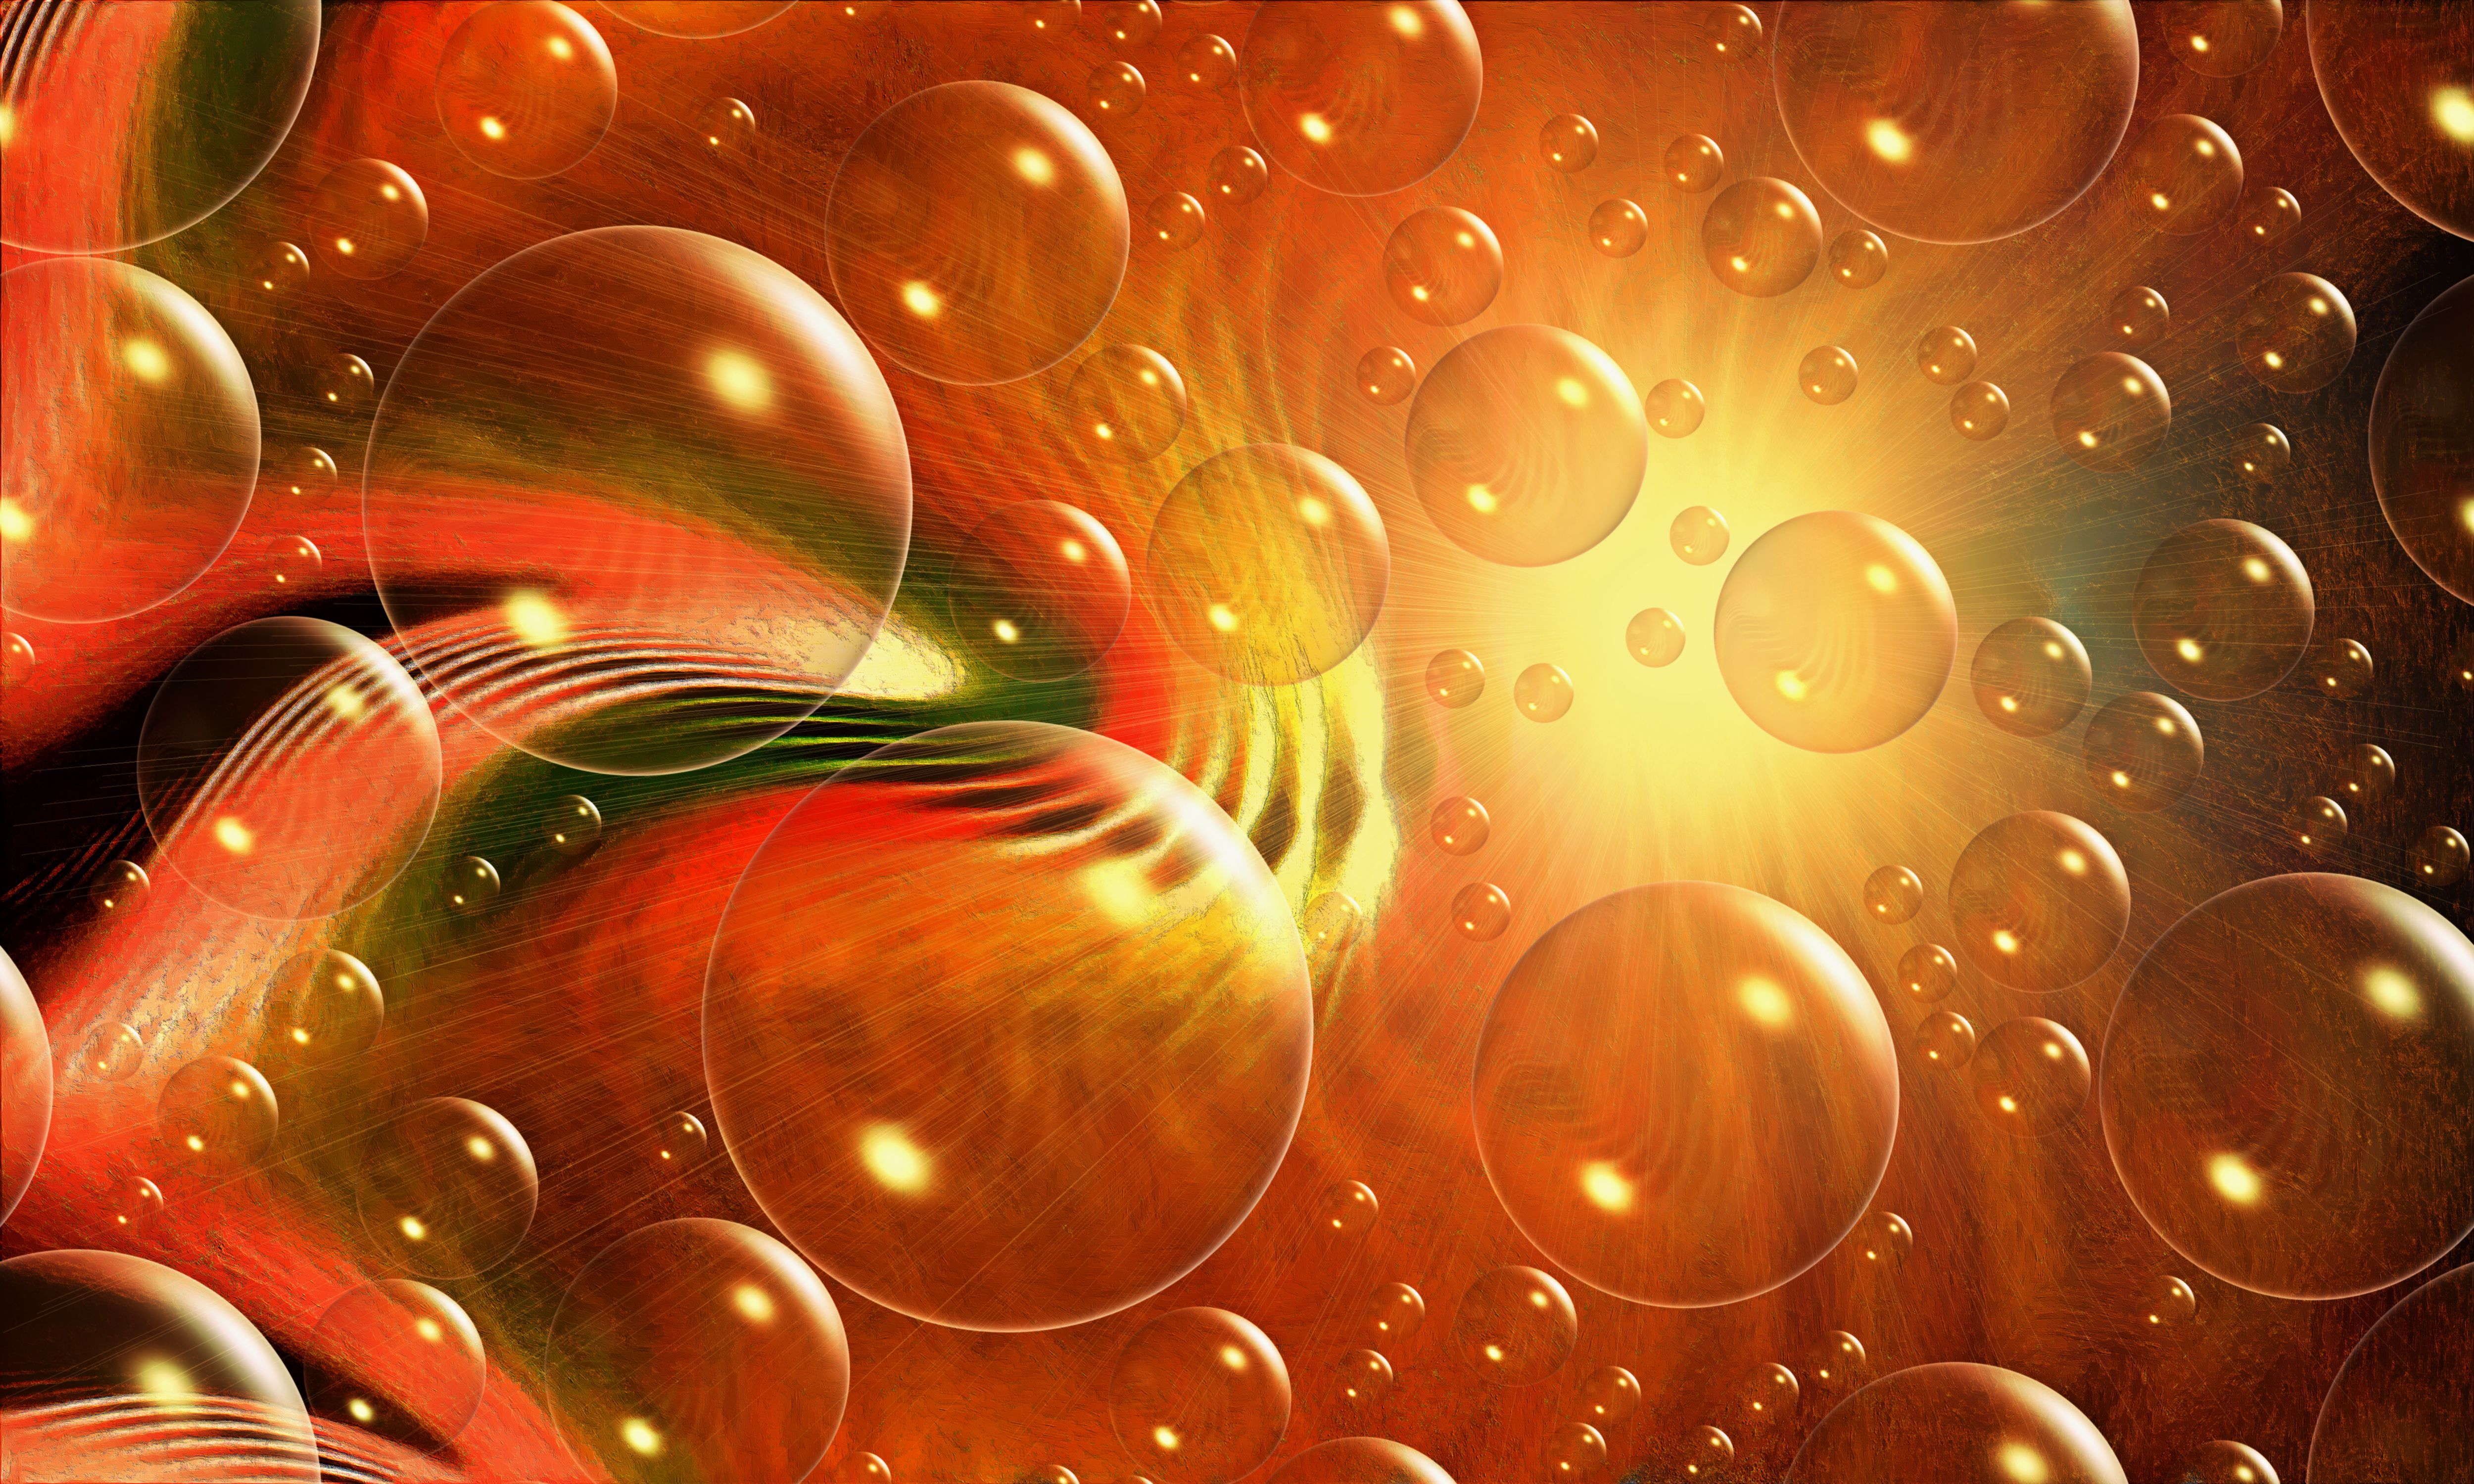 153725 free download Orange wallpapers for phone, lines, bubbles, abstract Orange images and screensavers for mobile